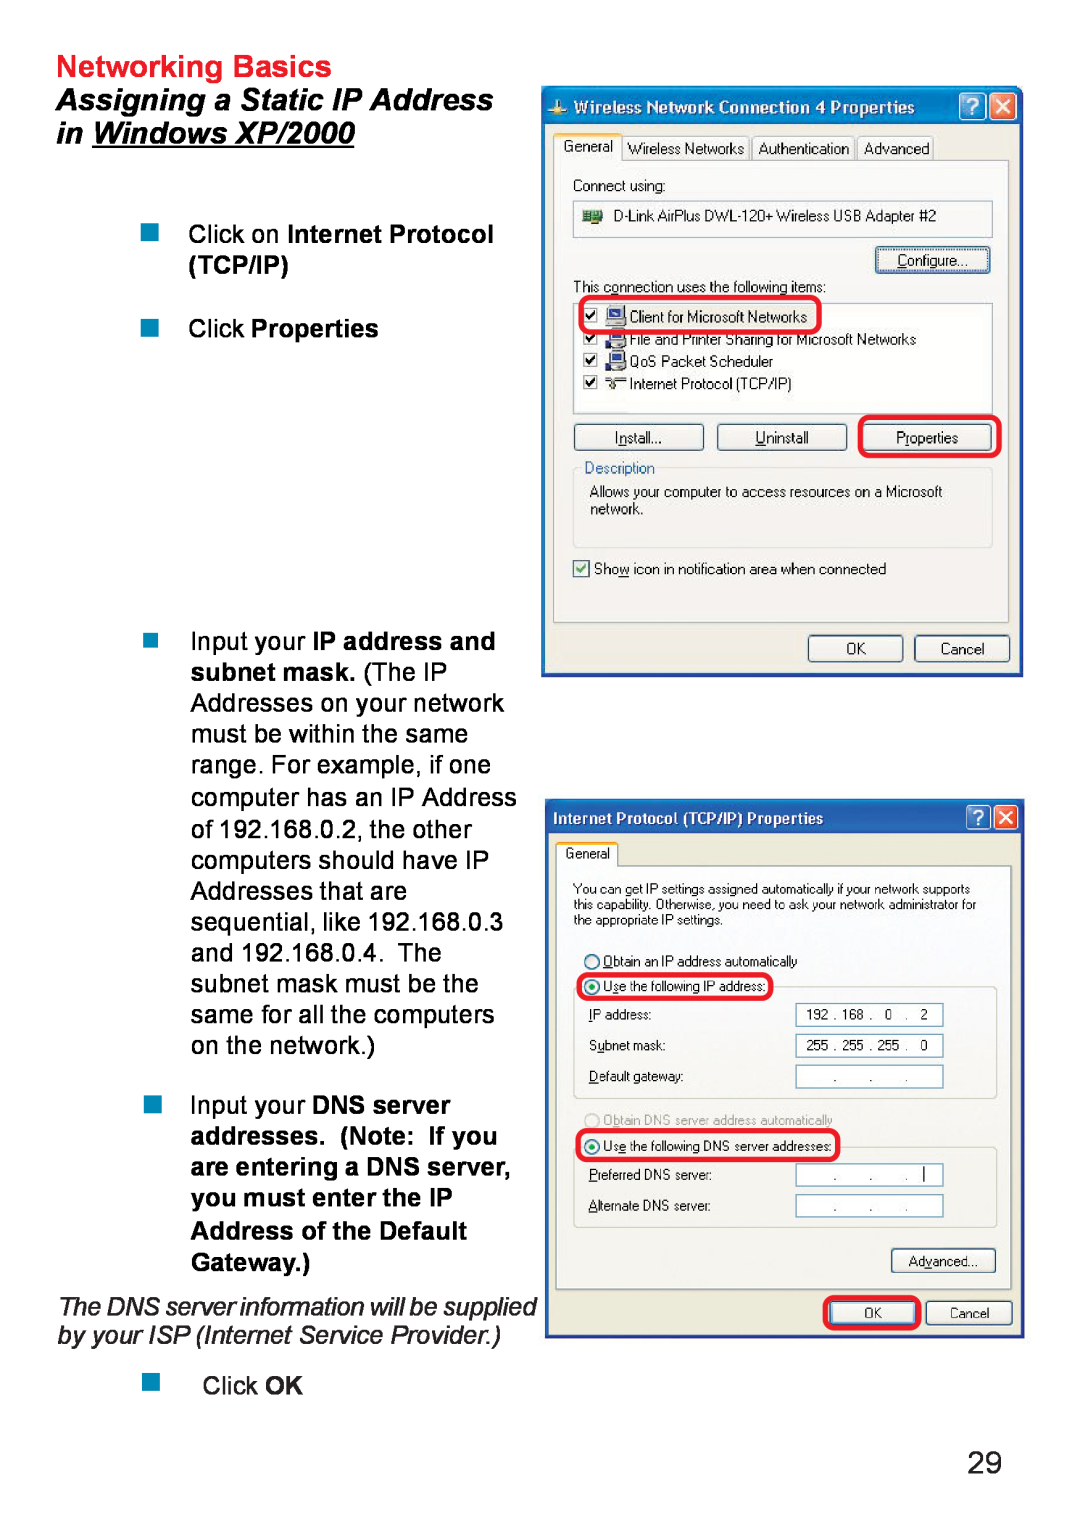 D-Link DWL-120+ manual Networking Basics, Assigning a Static IP Address in Windows XP/2000 